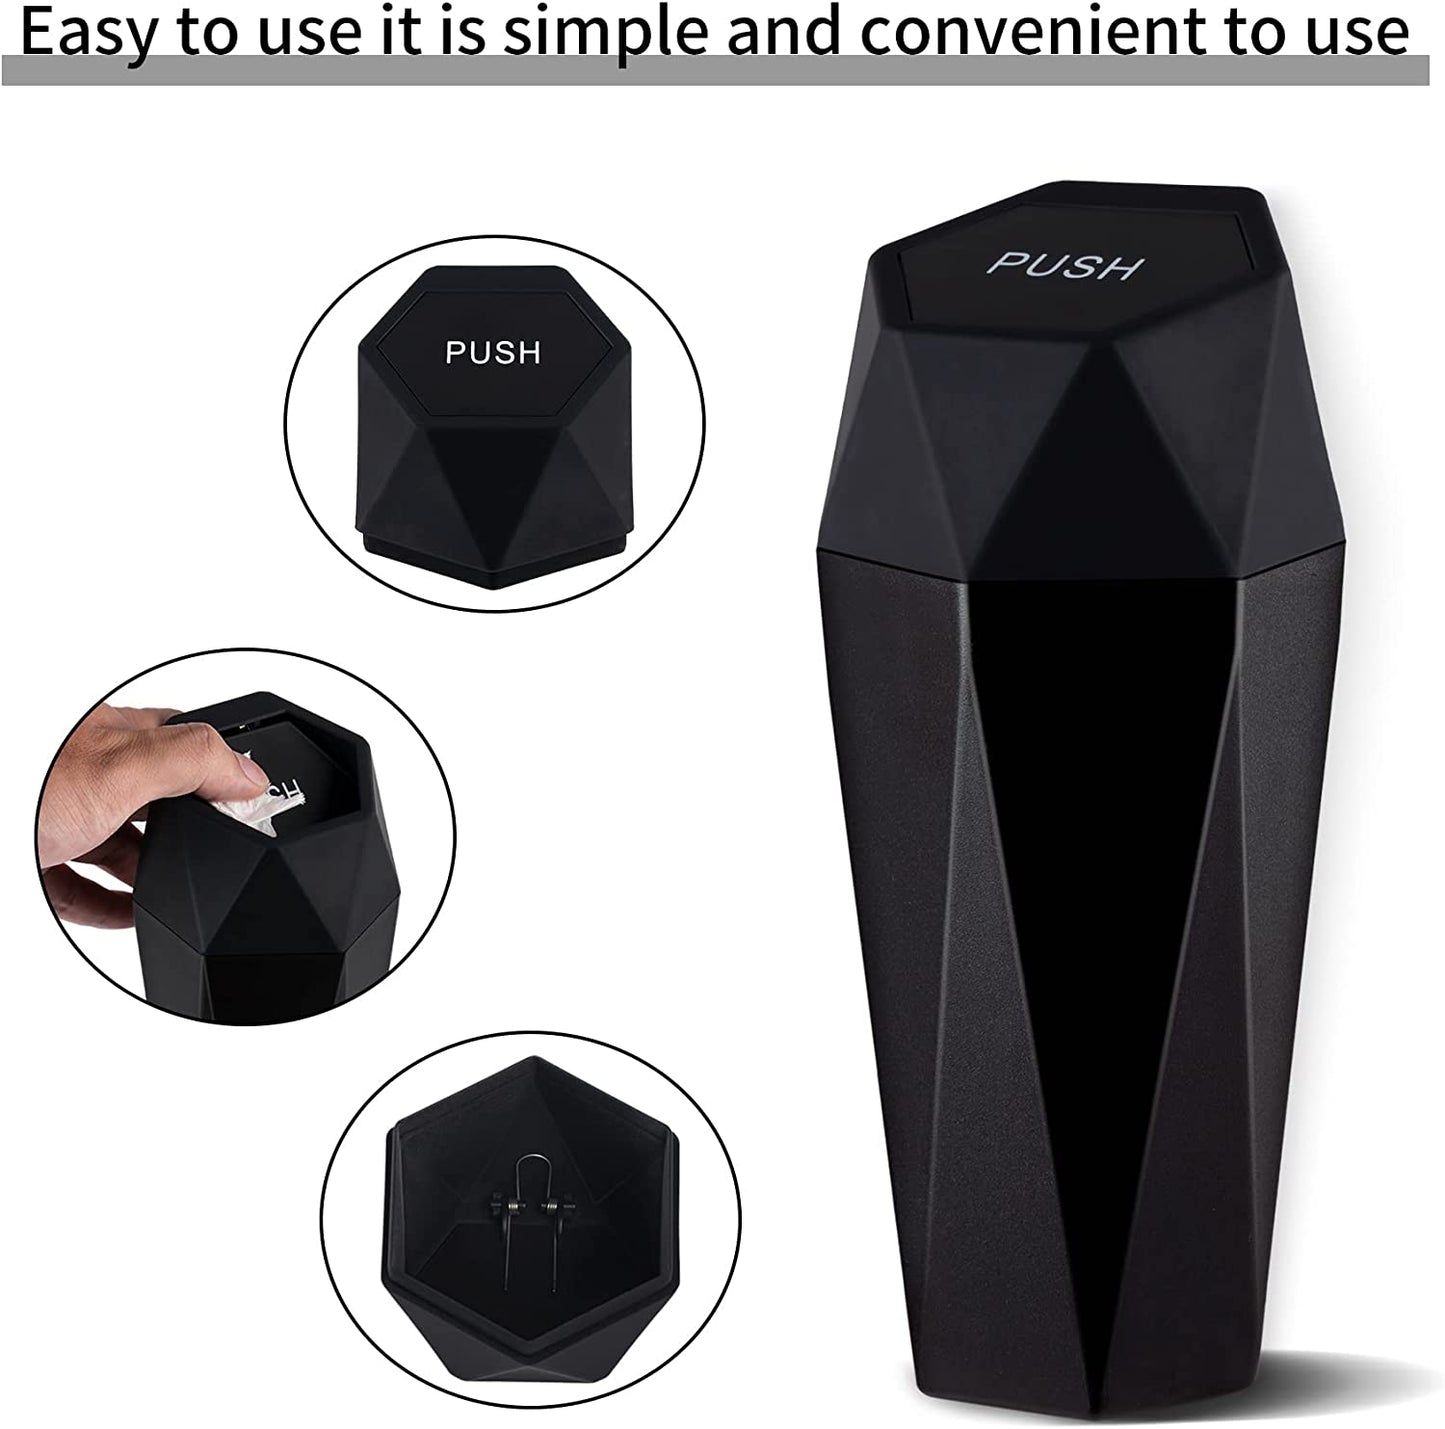 JUSTTOP Car Trash Can with Lid, Diamond Design Small Automatic Portable Trash Can, Easy to Clean, Used in Car Home Office (Black) - cid_441061507362